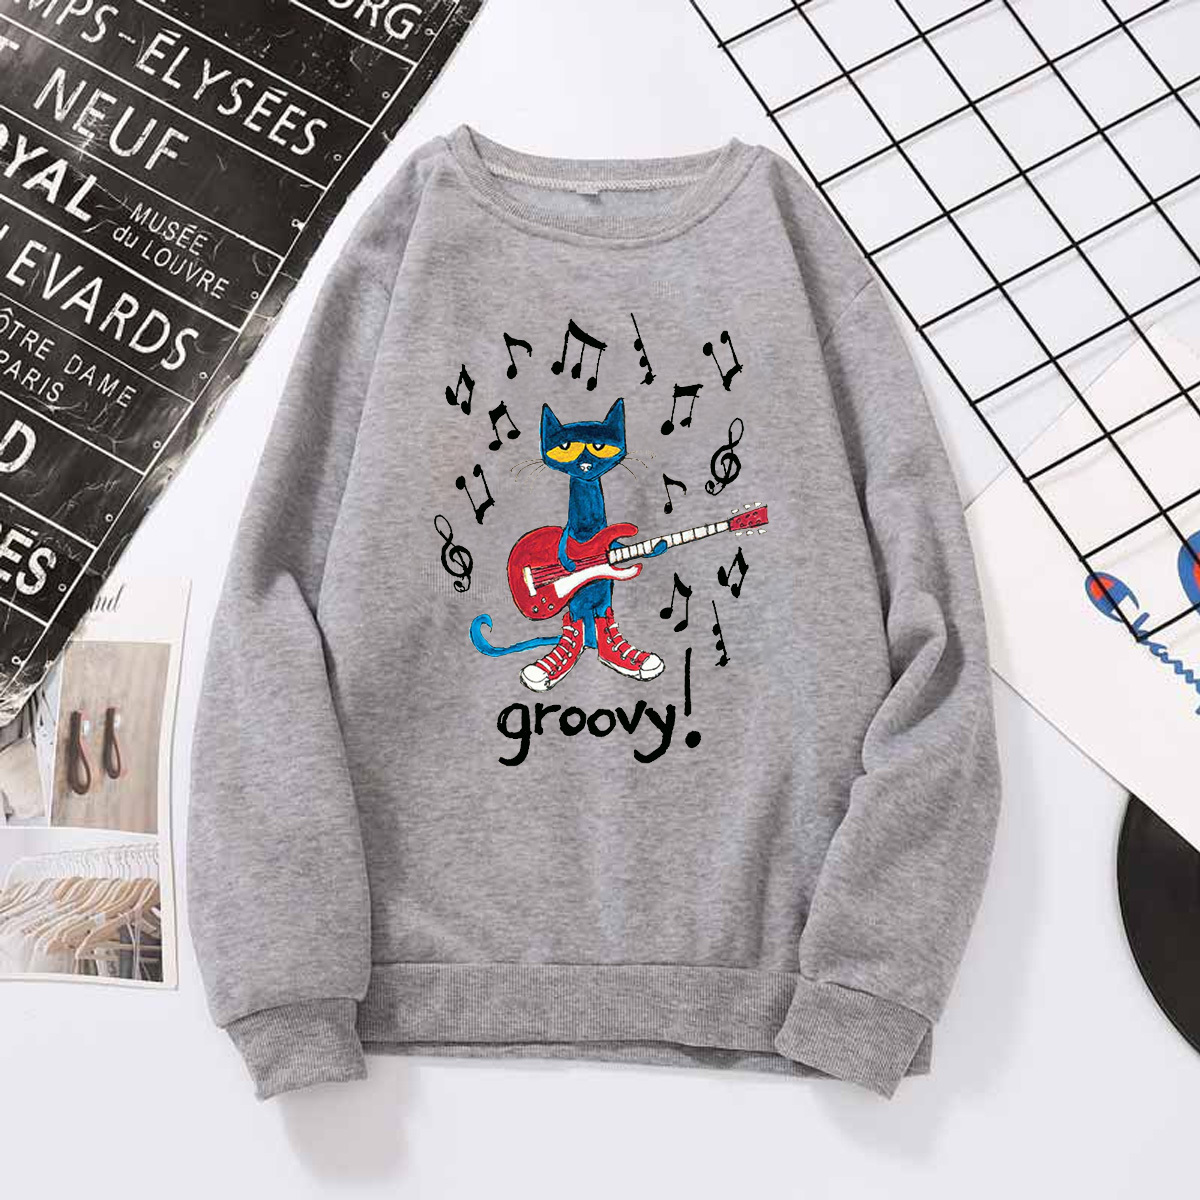 Pete The Cat Groovy Shirt, Music Is Groovy Shirt, Reading is Groovy Shirt, Blue Cat Birthday Shirt, pete the cat play guitar shirt